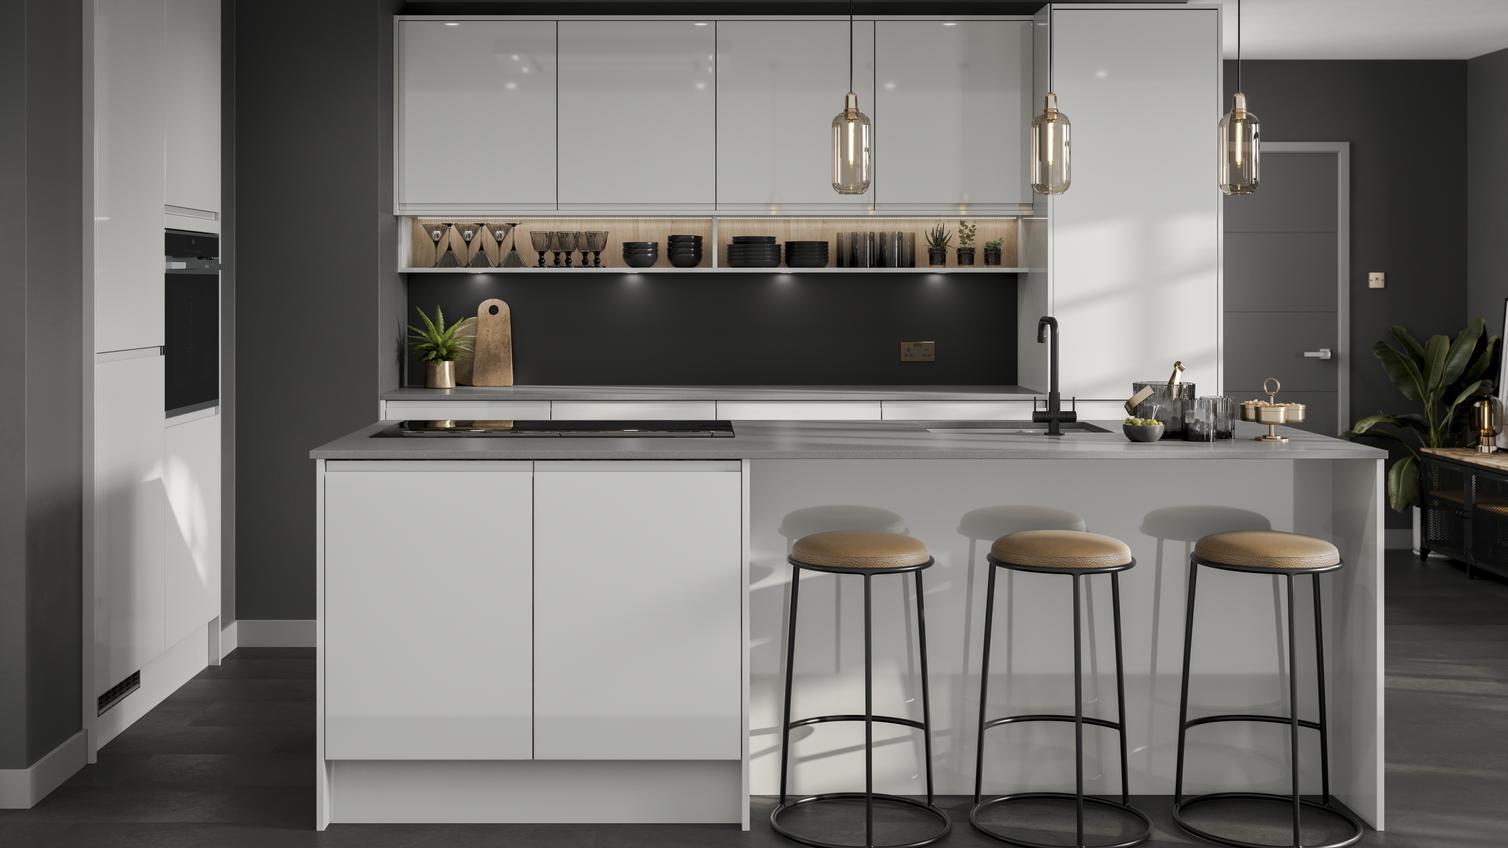 Modern gloss grey kitchen with cotemporary accessories including black kitchen tap and dark grey walls and pendant lighting.